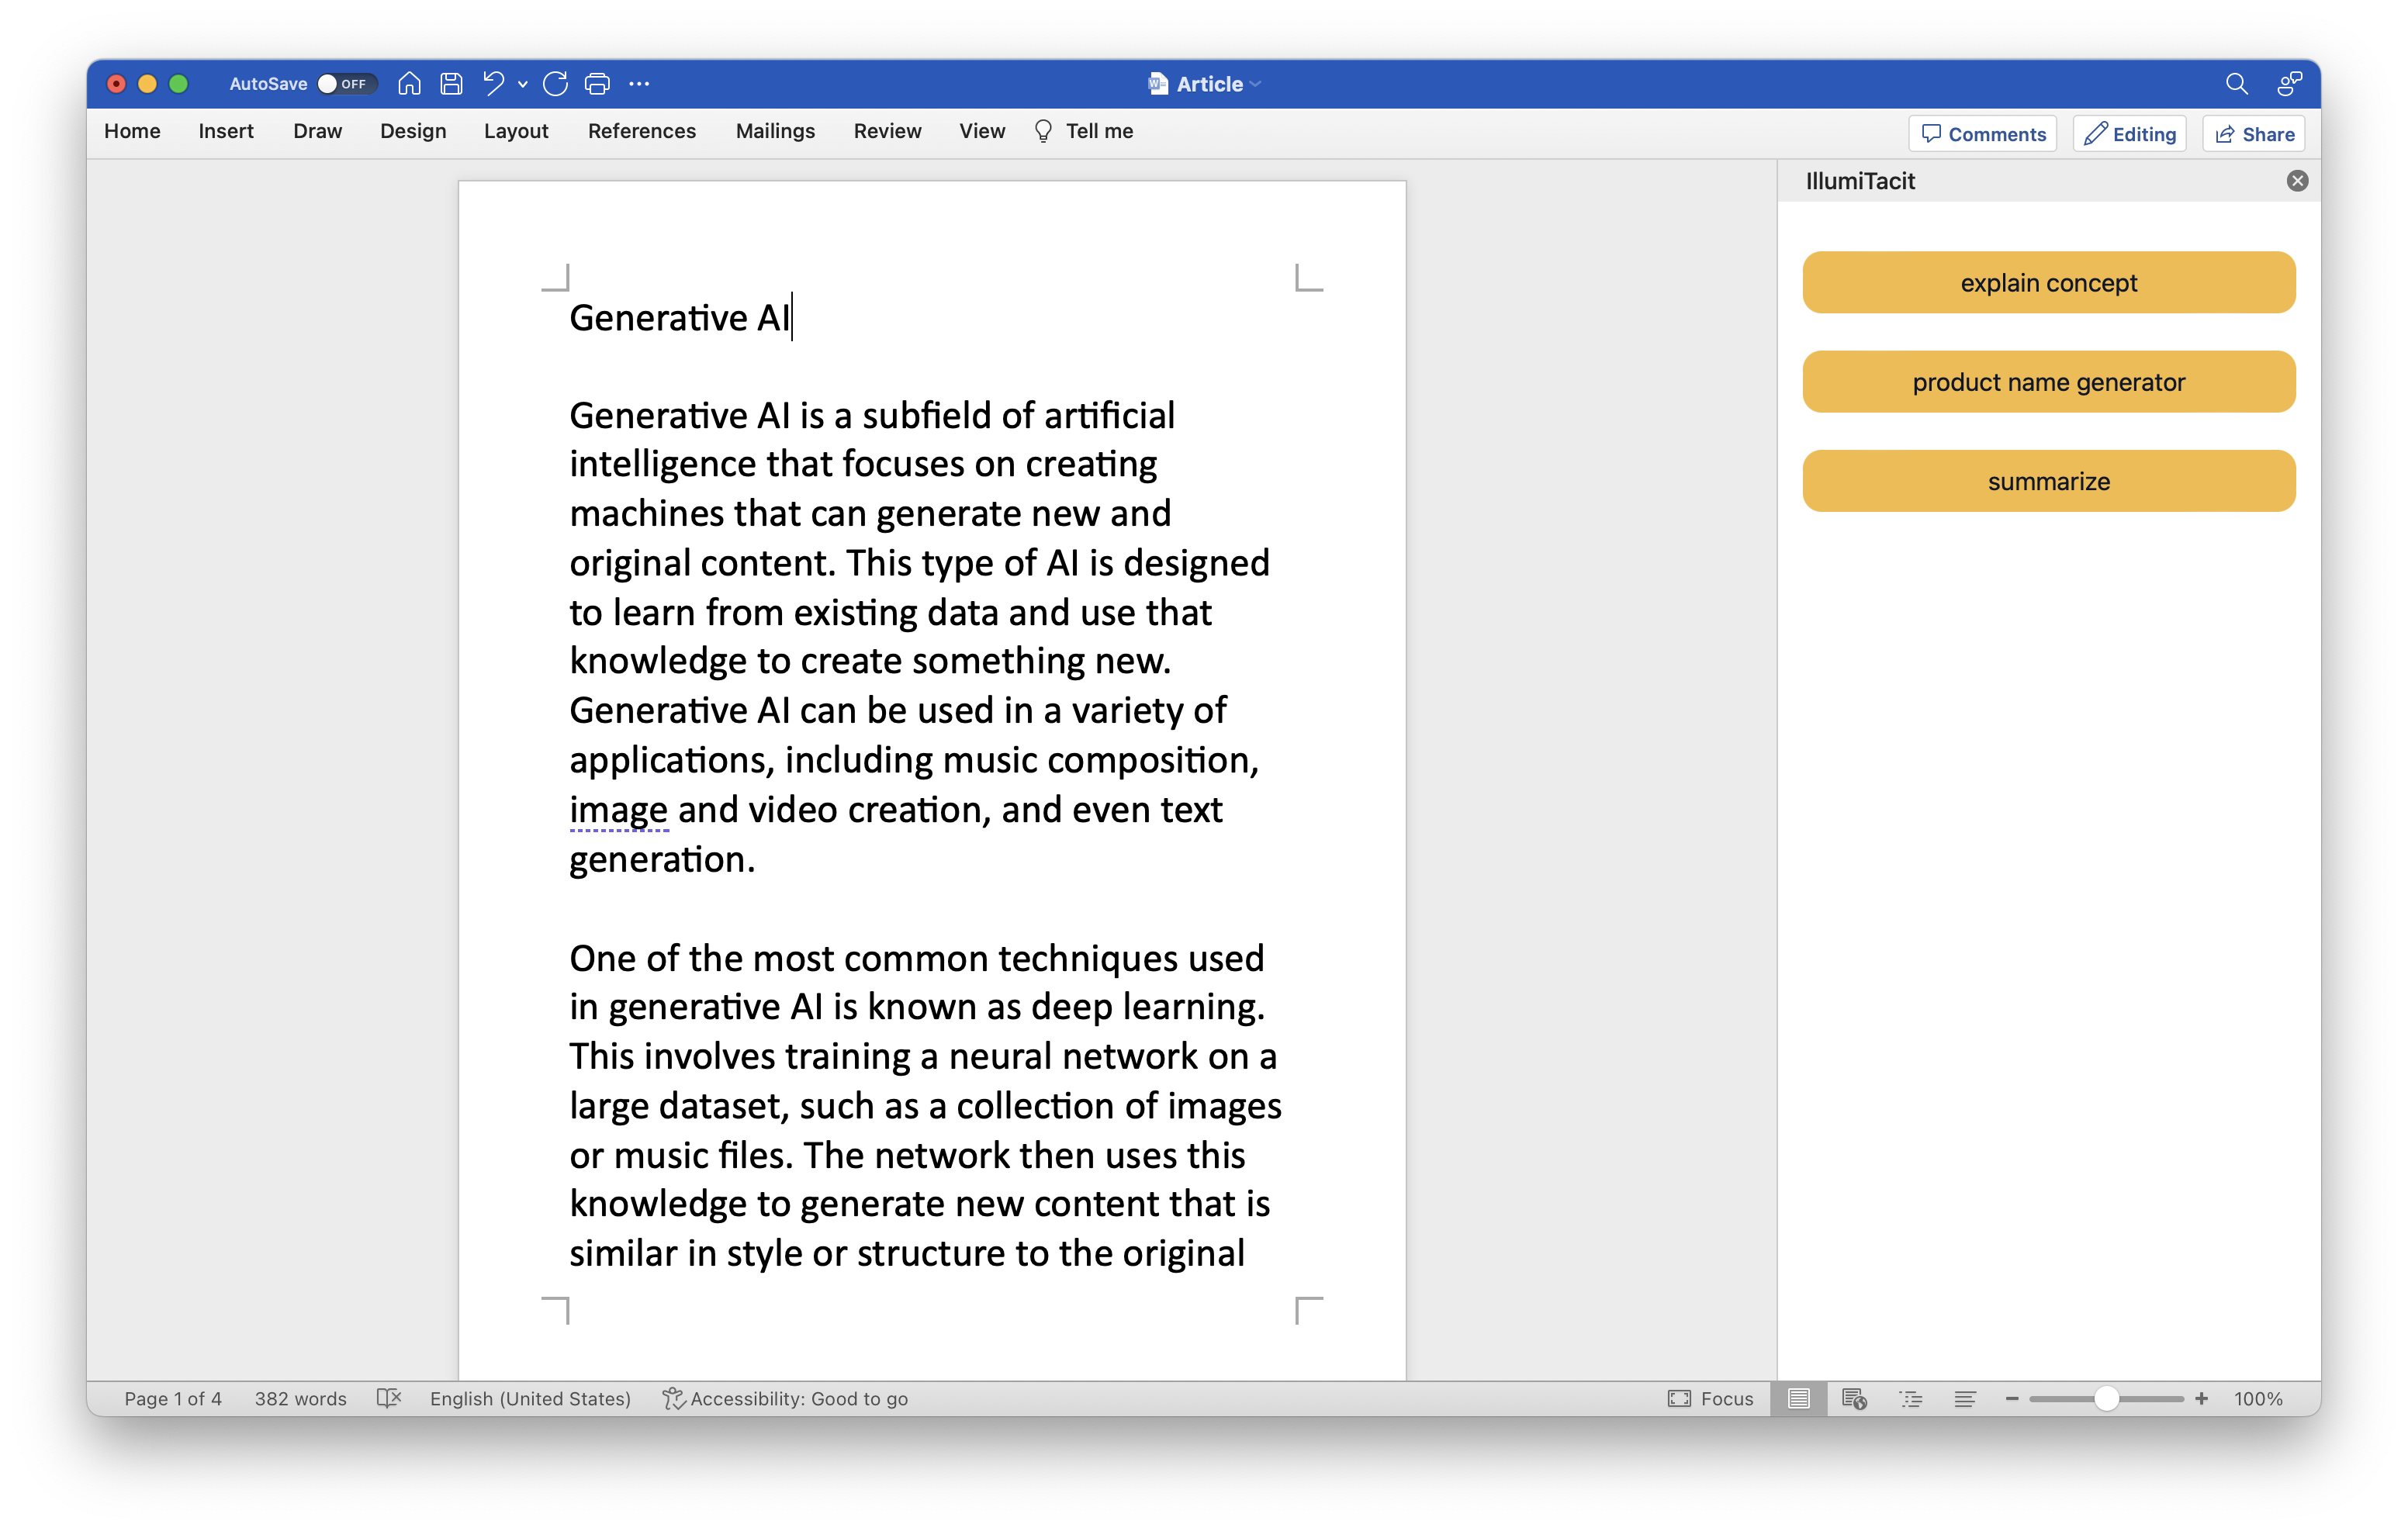 illumitacit can be embedded in ms word with ease.